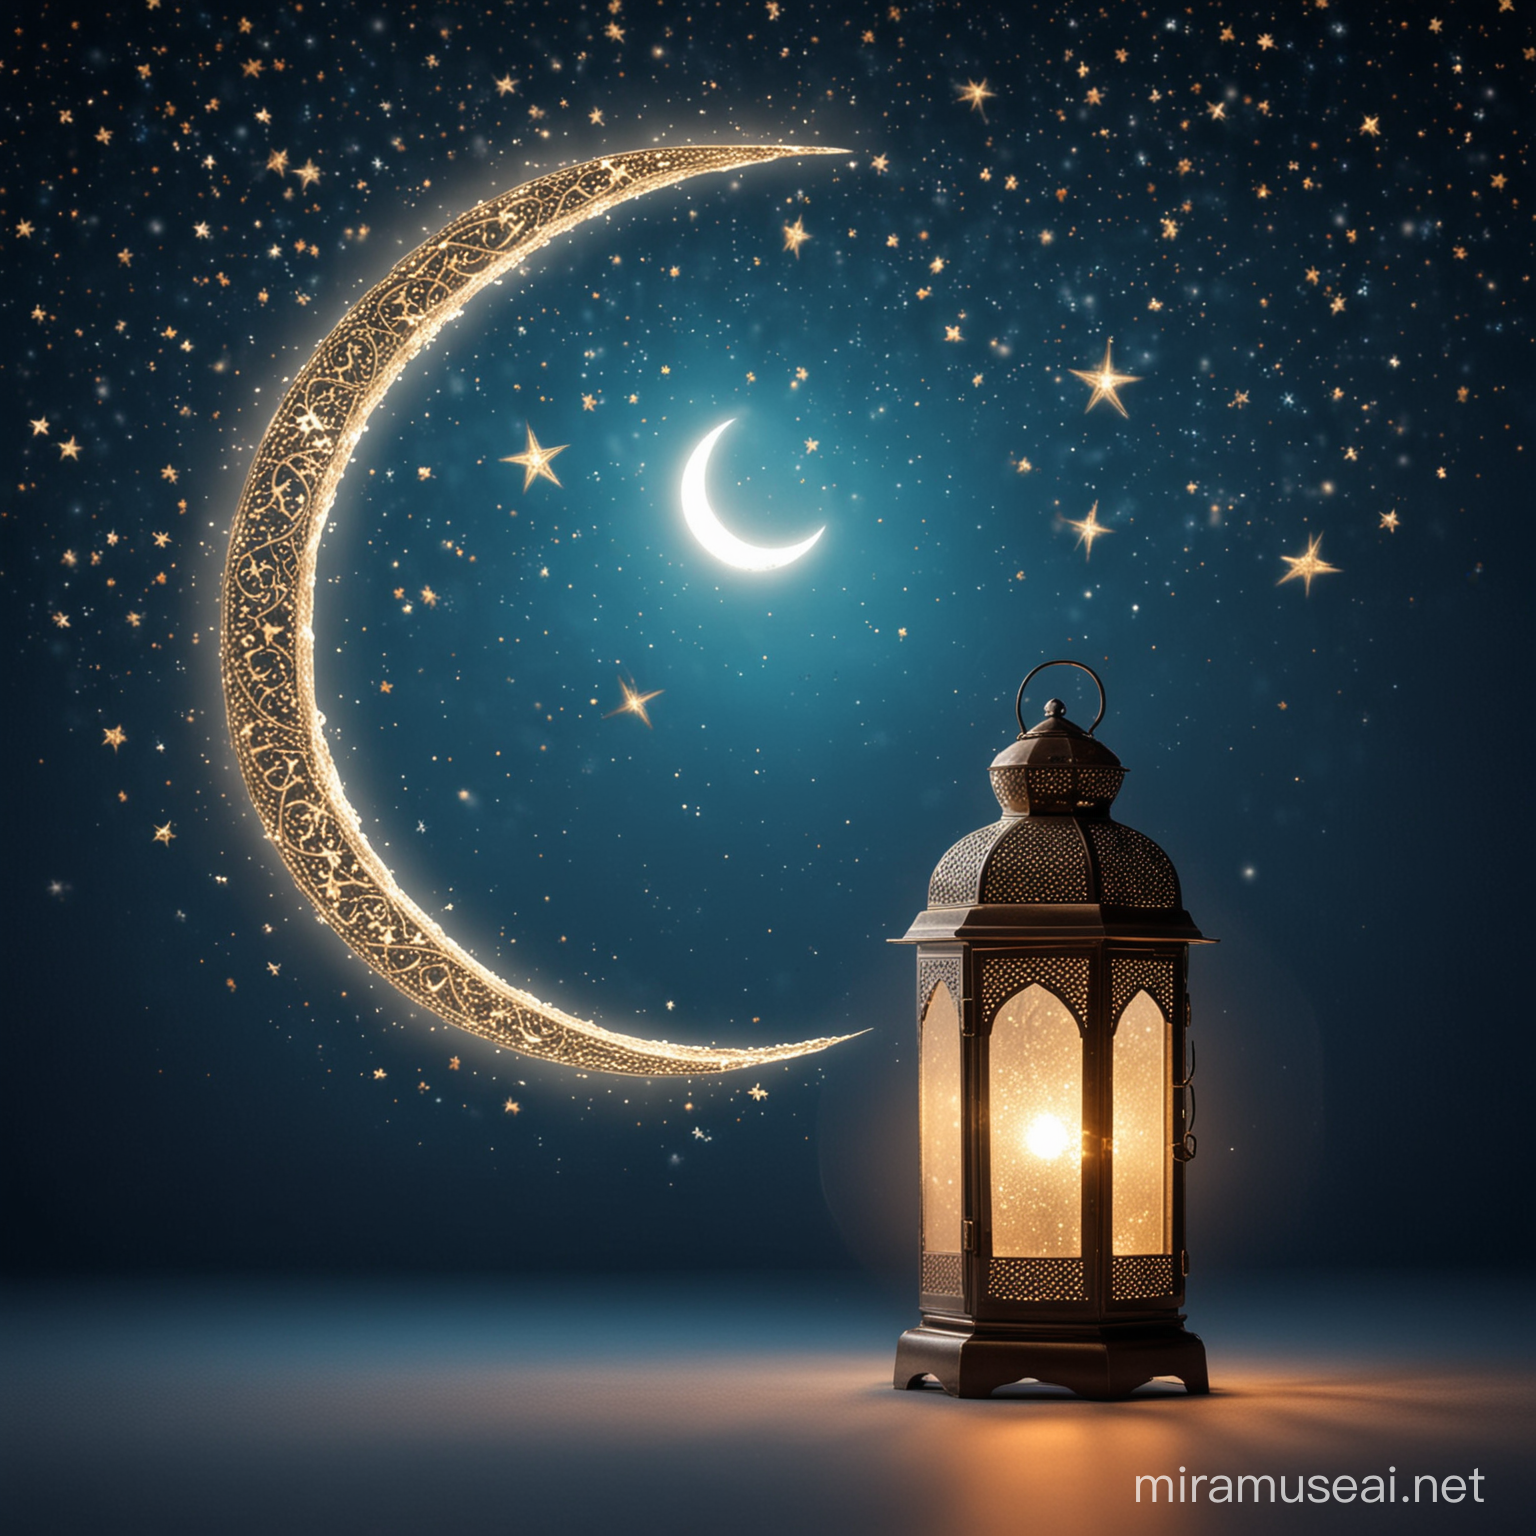 Islamic moon and lantern in front of a blue enlightened background and small glittery and stars effect